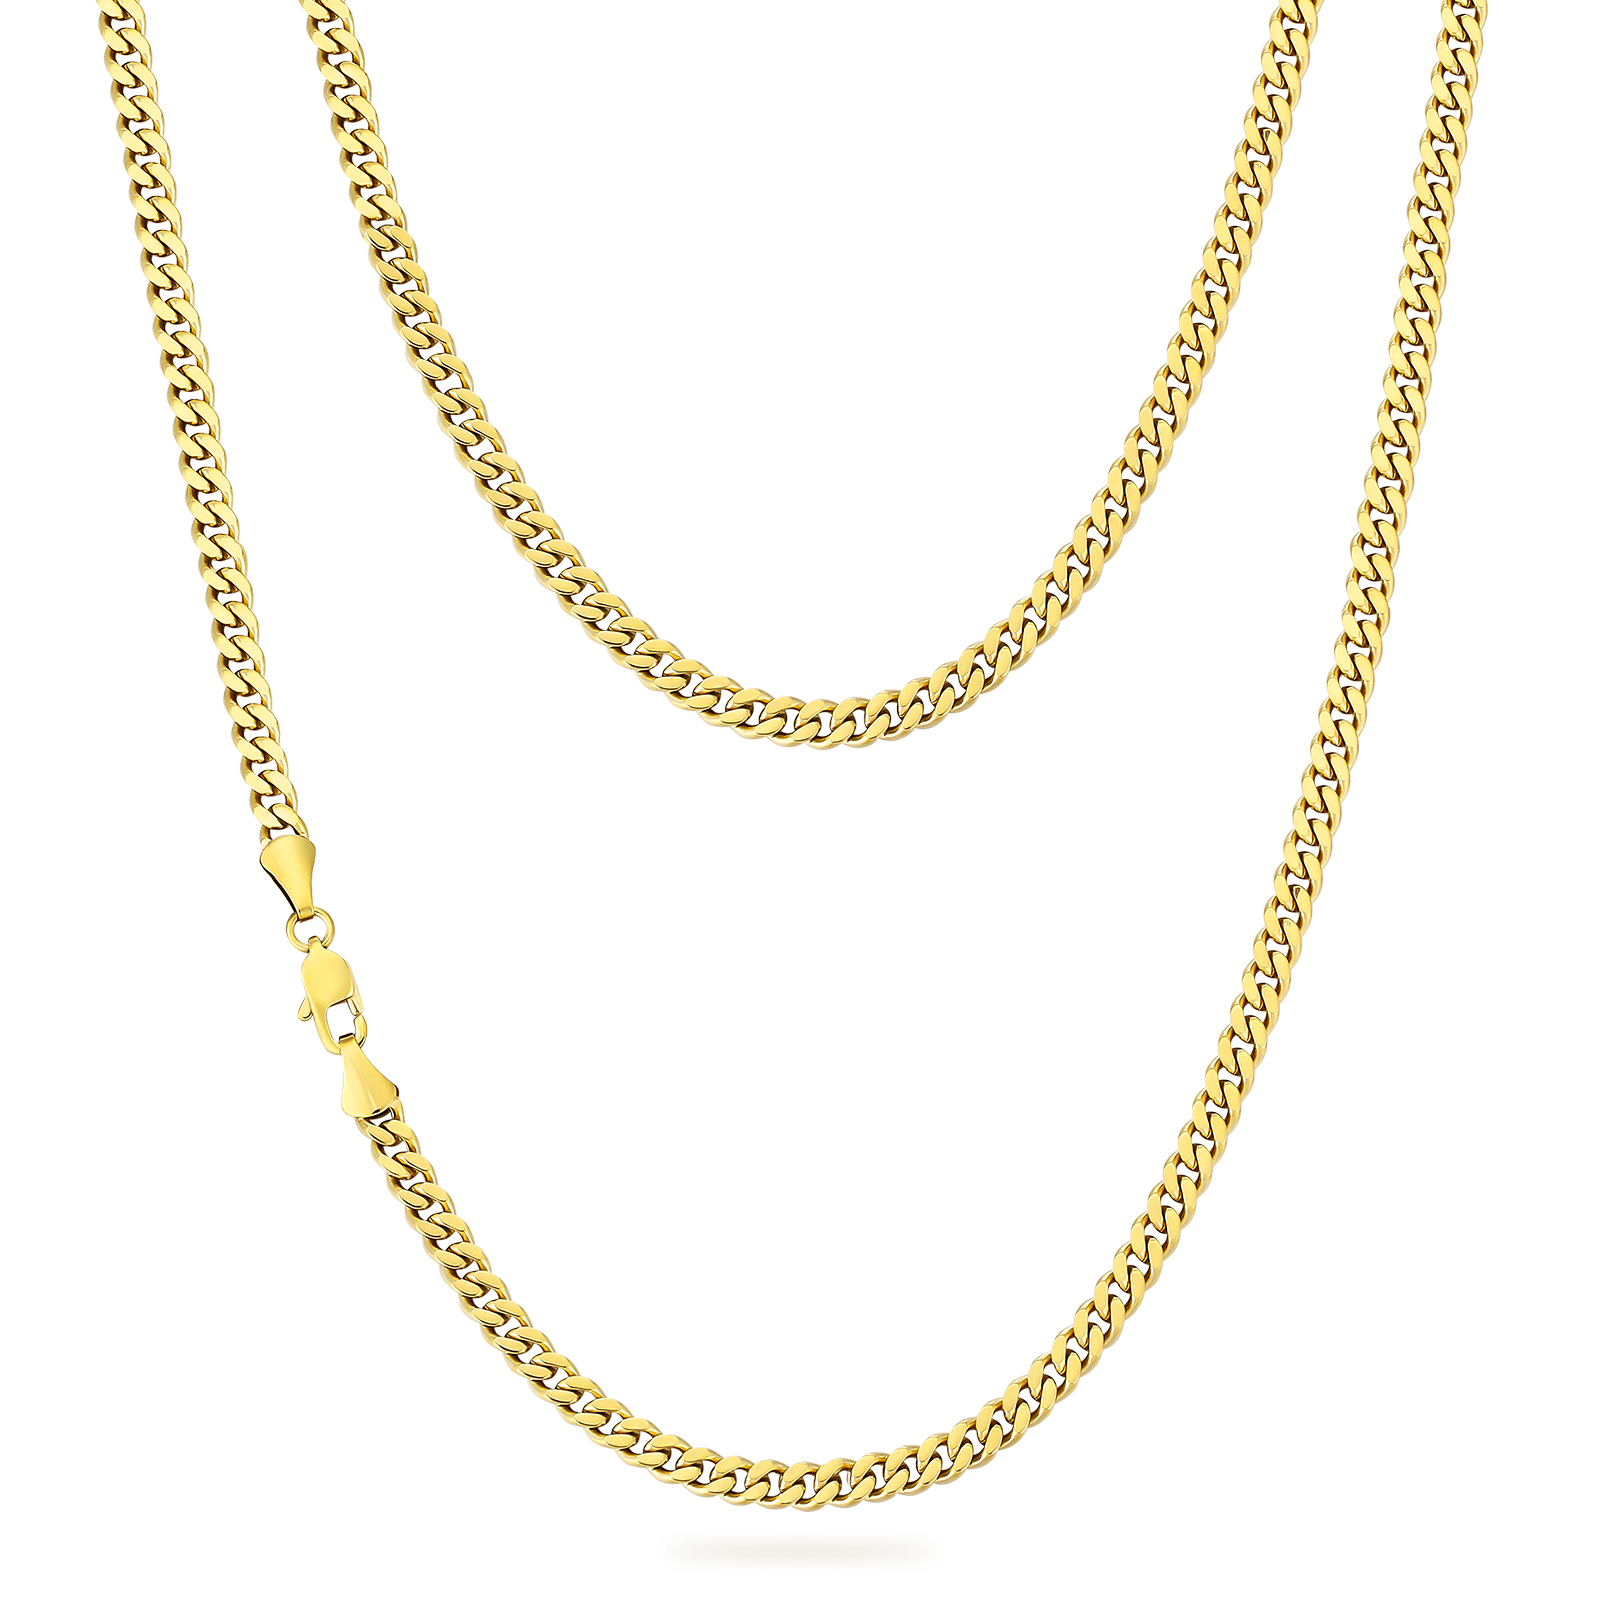 NEW】14k 喜平 ネックレス メンズ 幅4mm curb chain hiphop jewelry KRKC